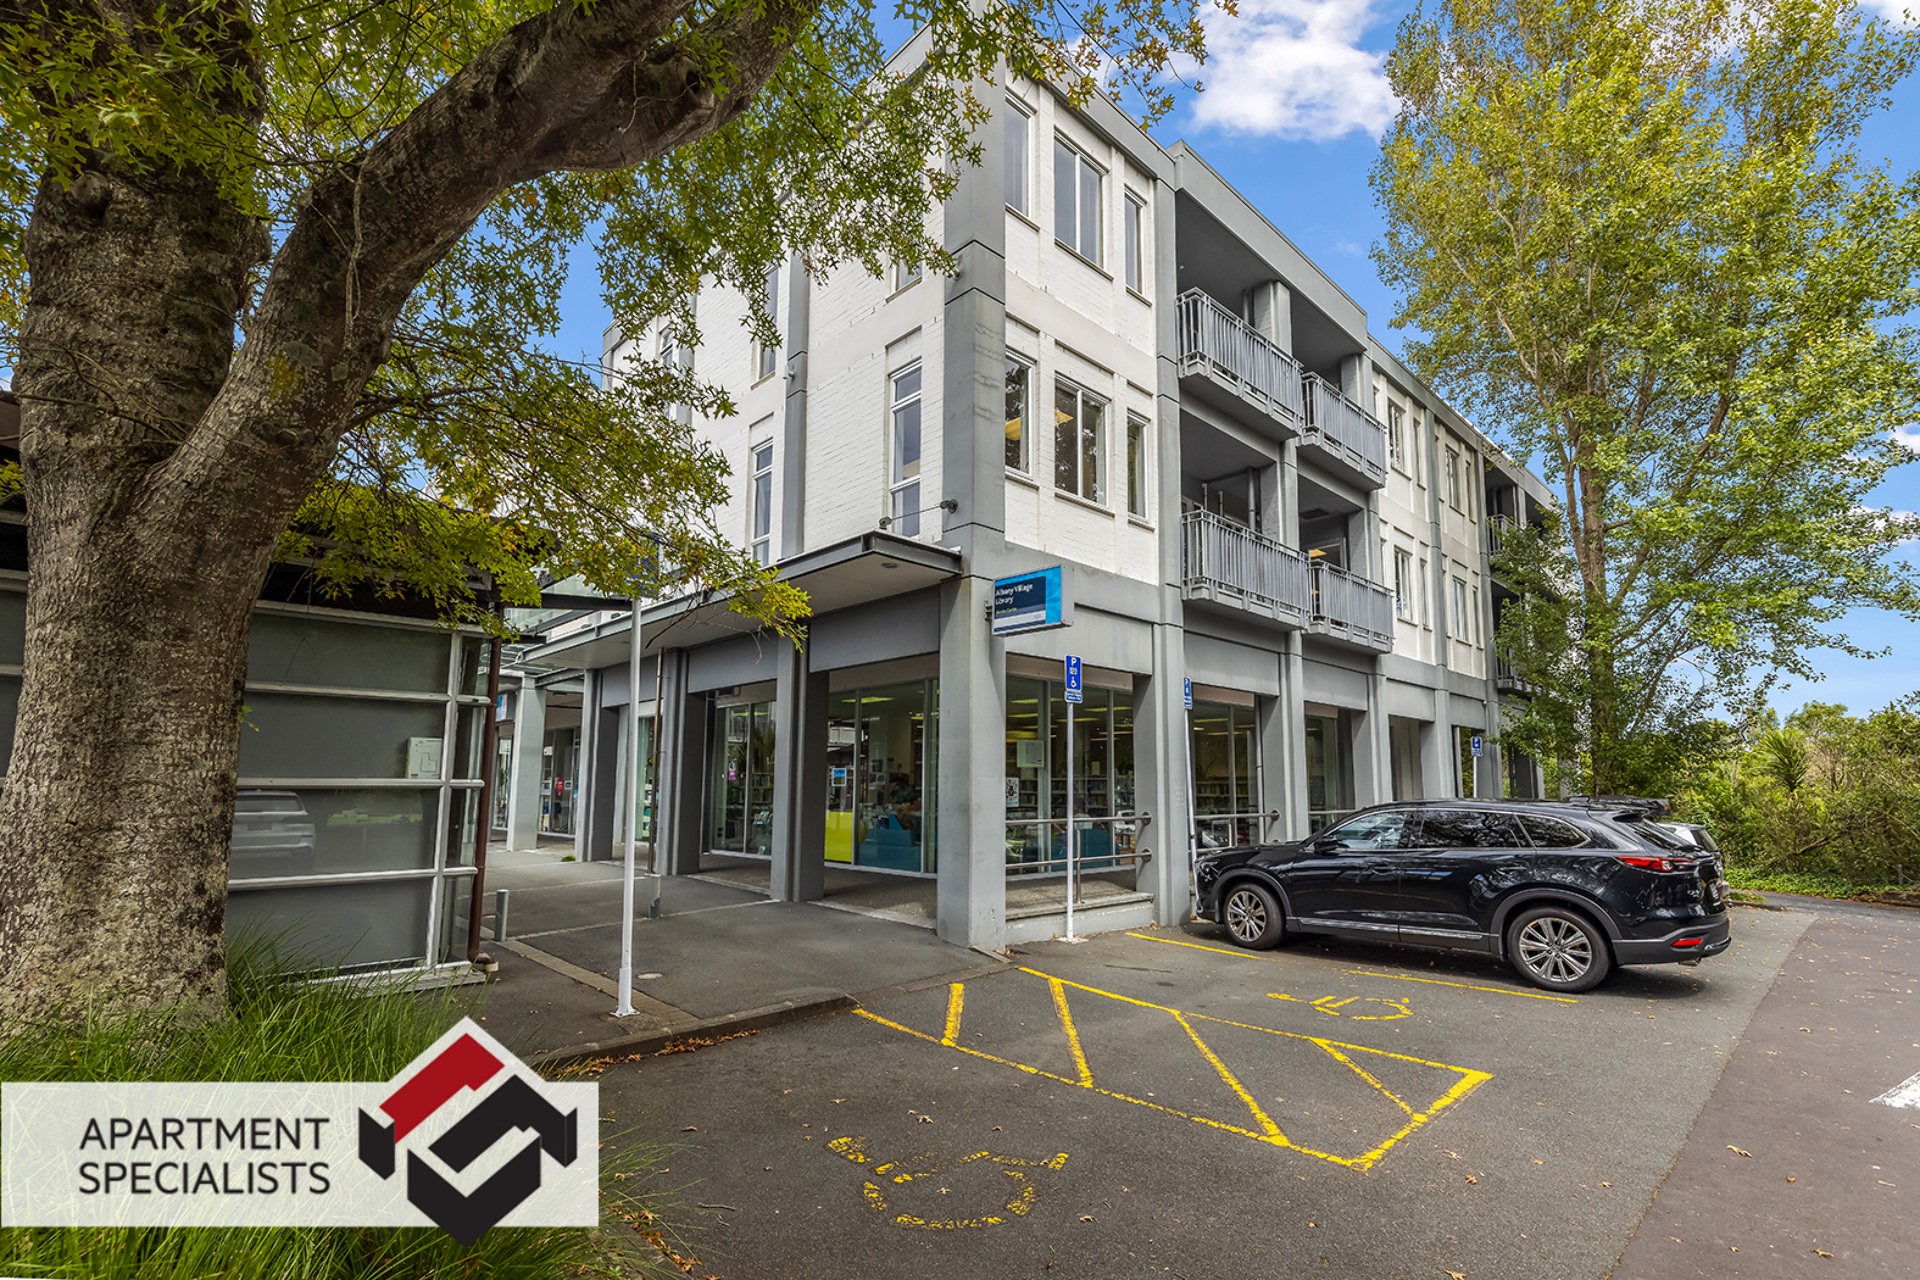 19 | 22 Library Lane, Albany | Apartment Specialists